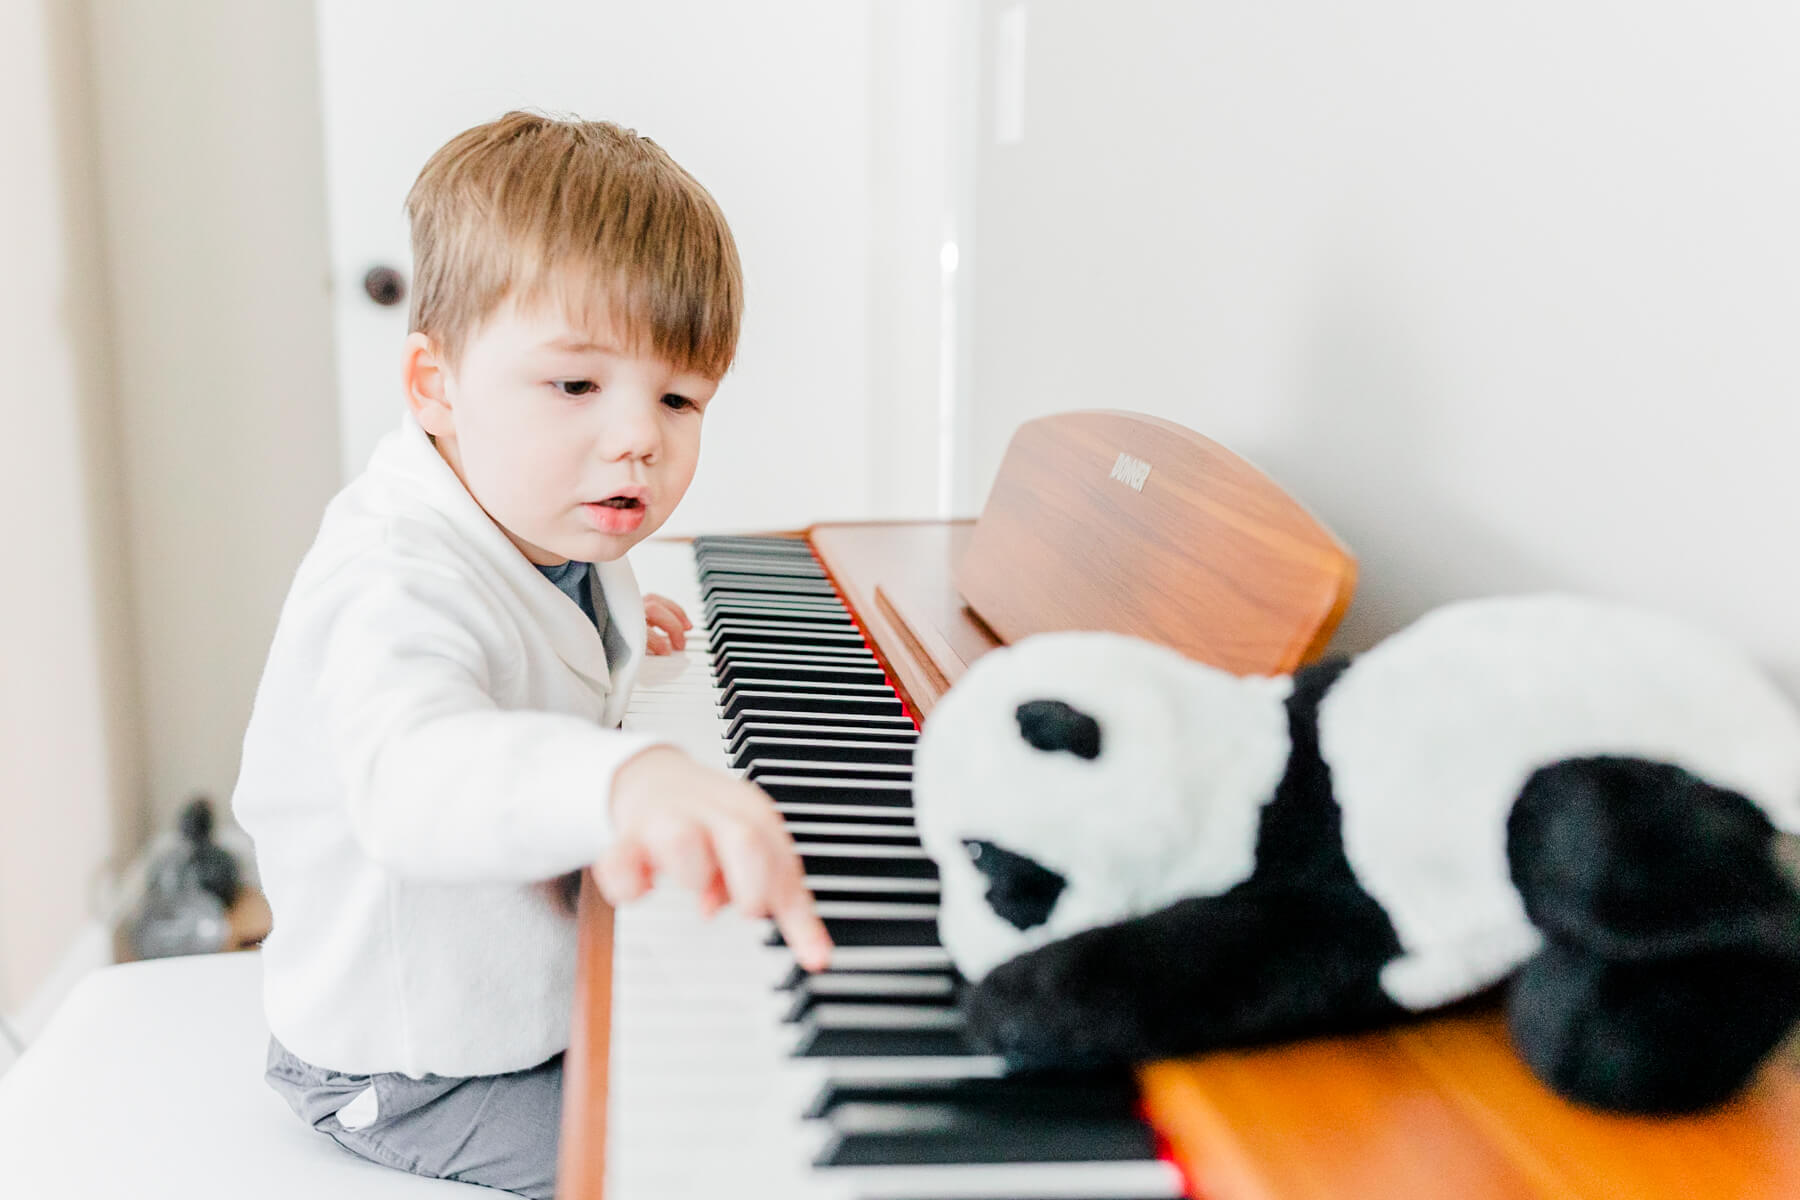 A young boy reaches for keys on a piano with his stuffed panda toy